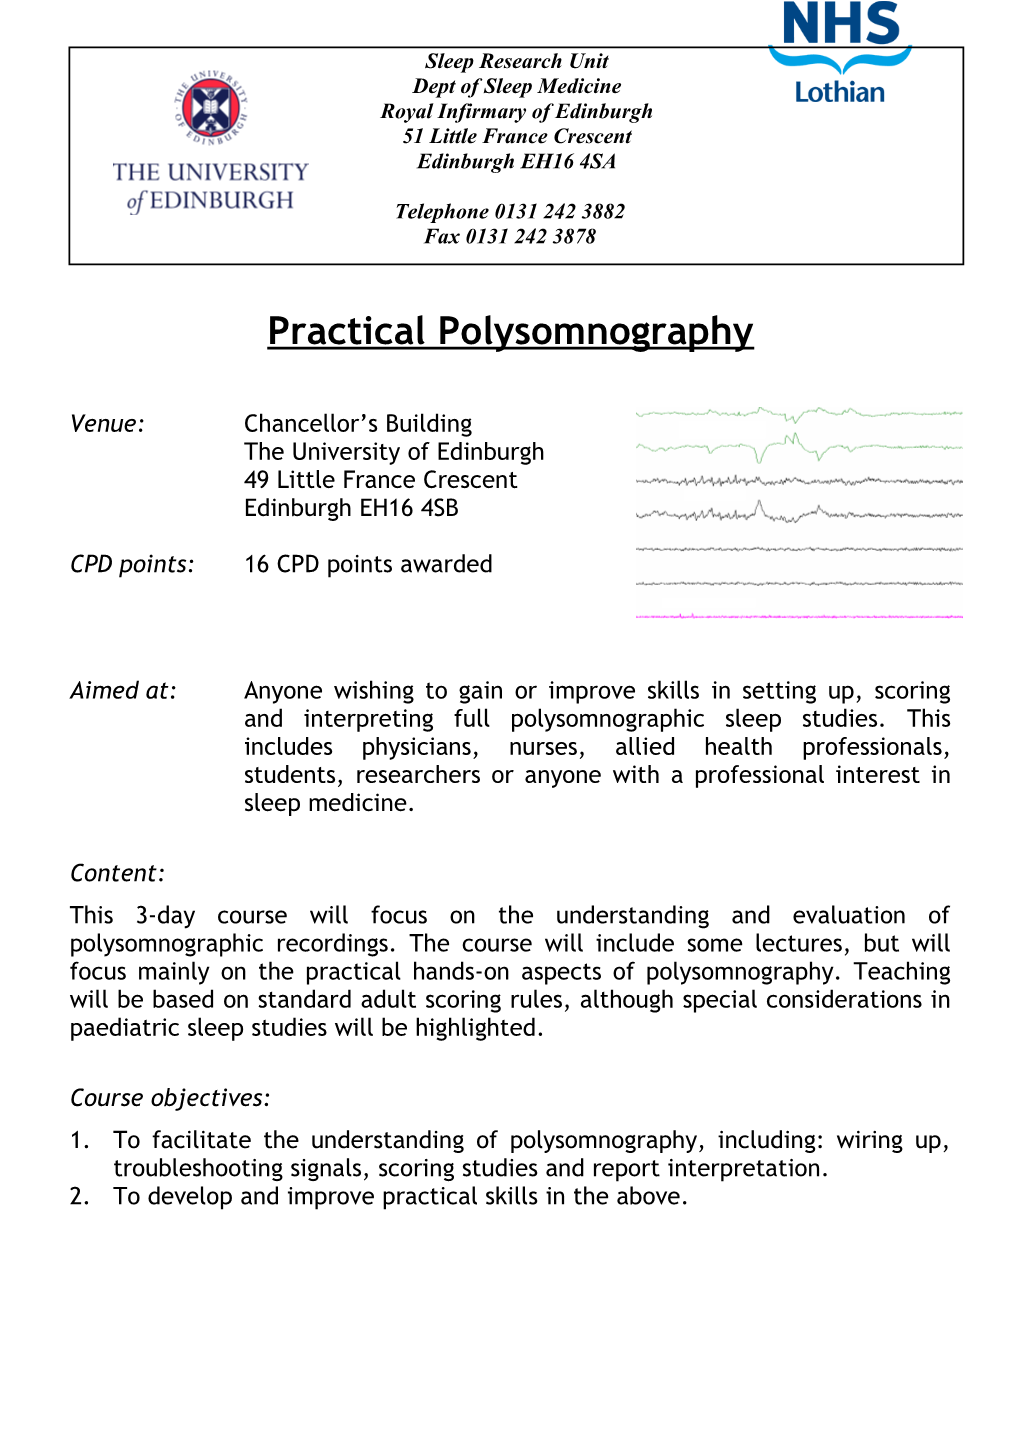 Practical Polysomnography